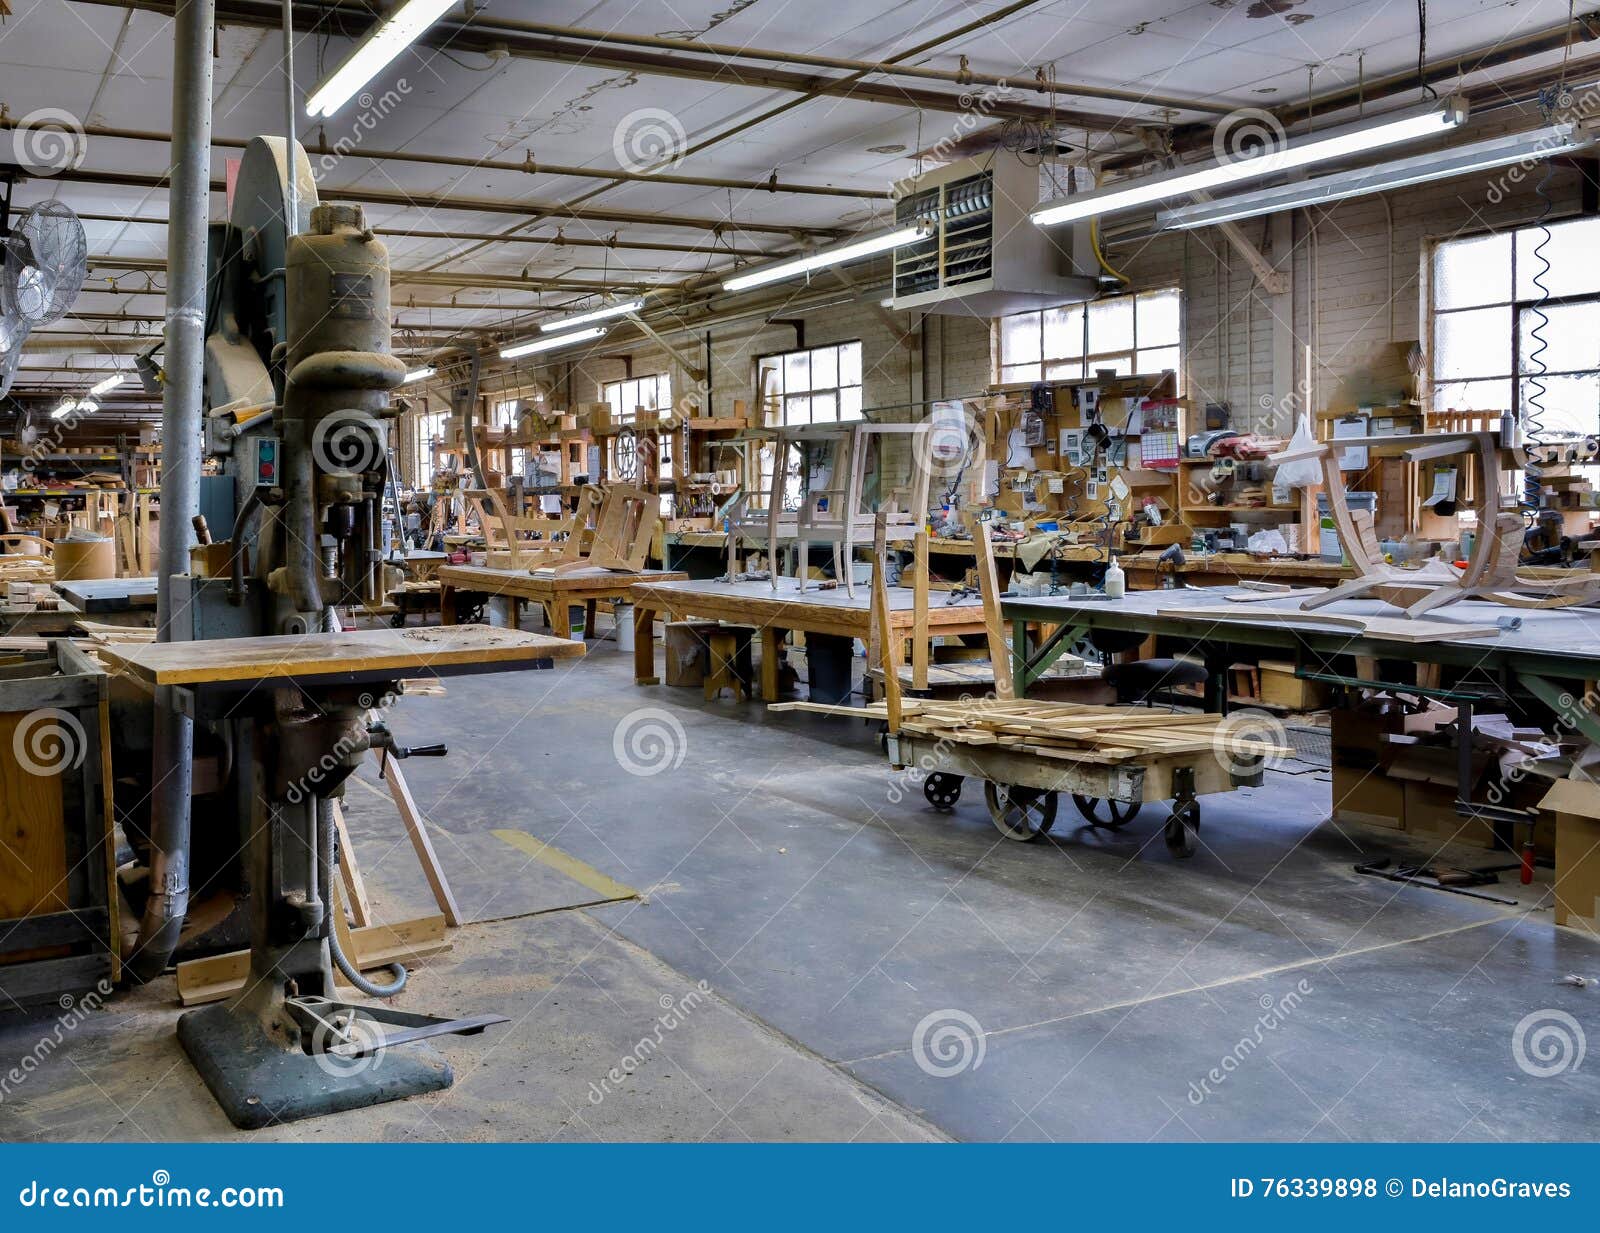 Furniture factory editorial stock photo. Image of ...